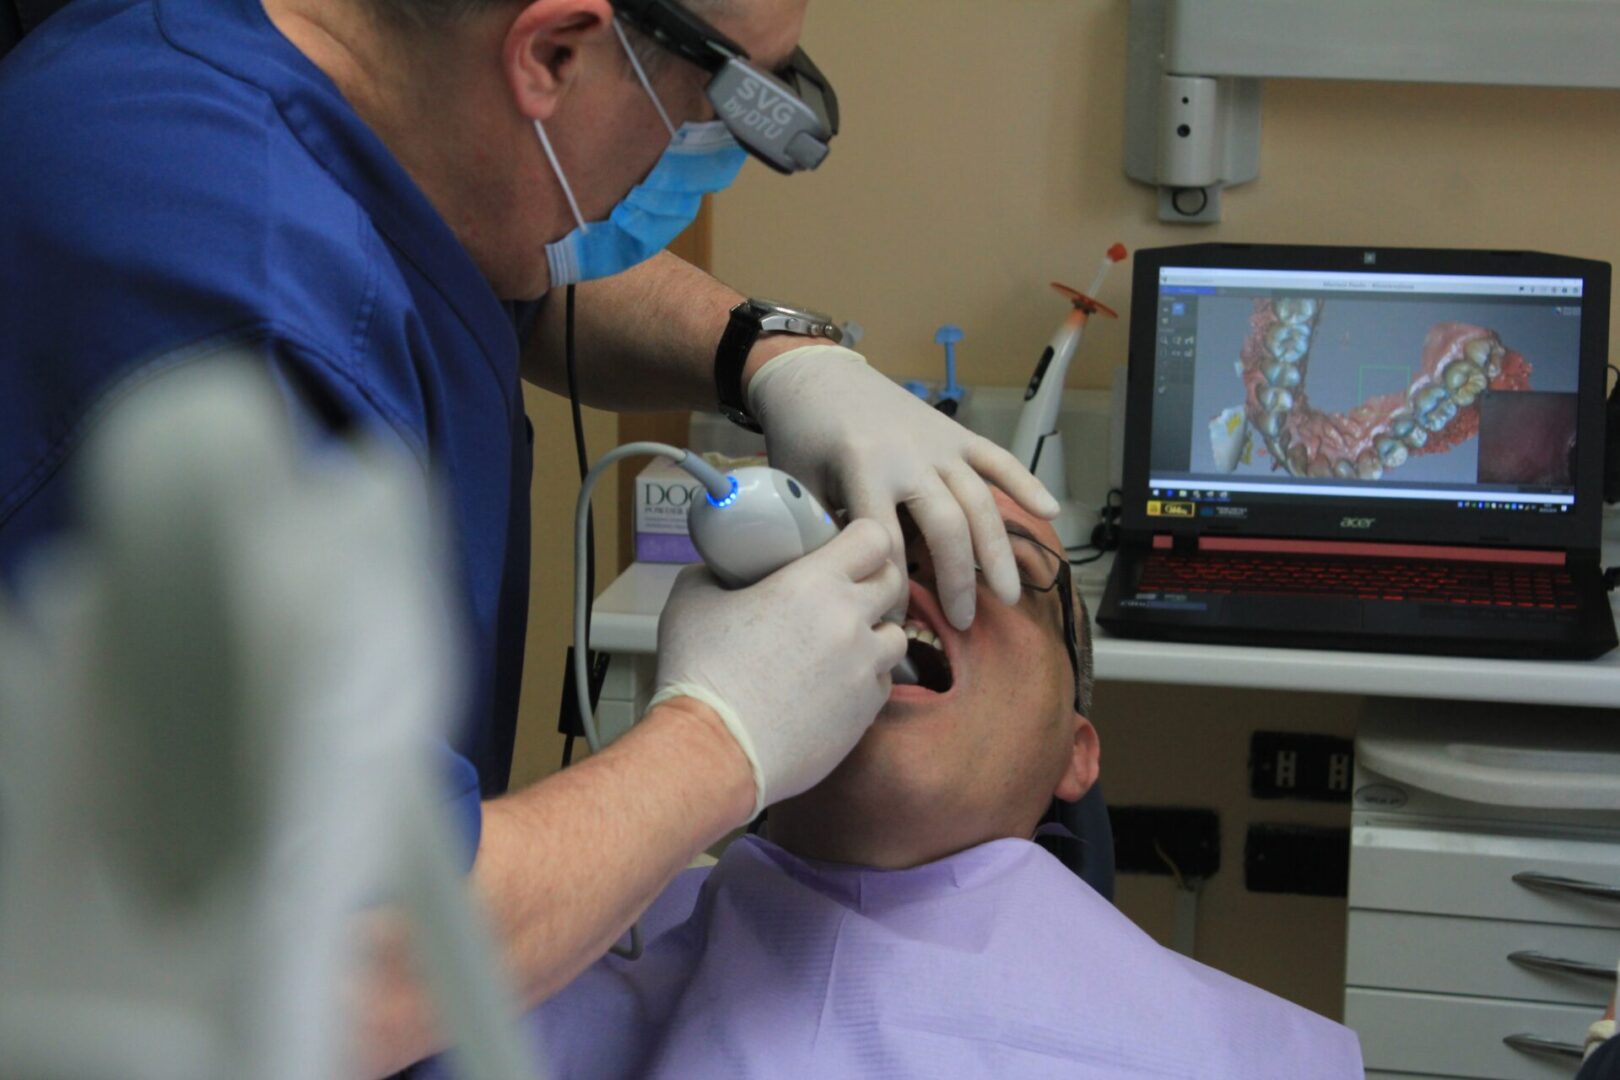 Dentist Examining Patient With Latest Equipment and Watch on Laptop